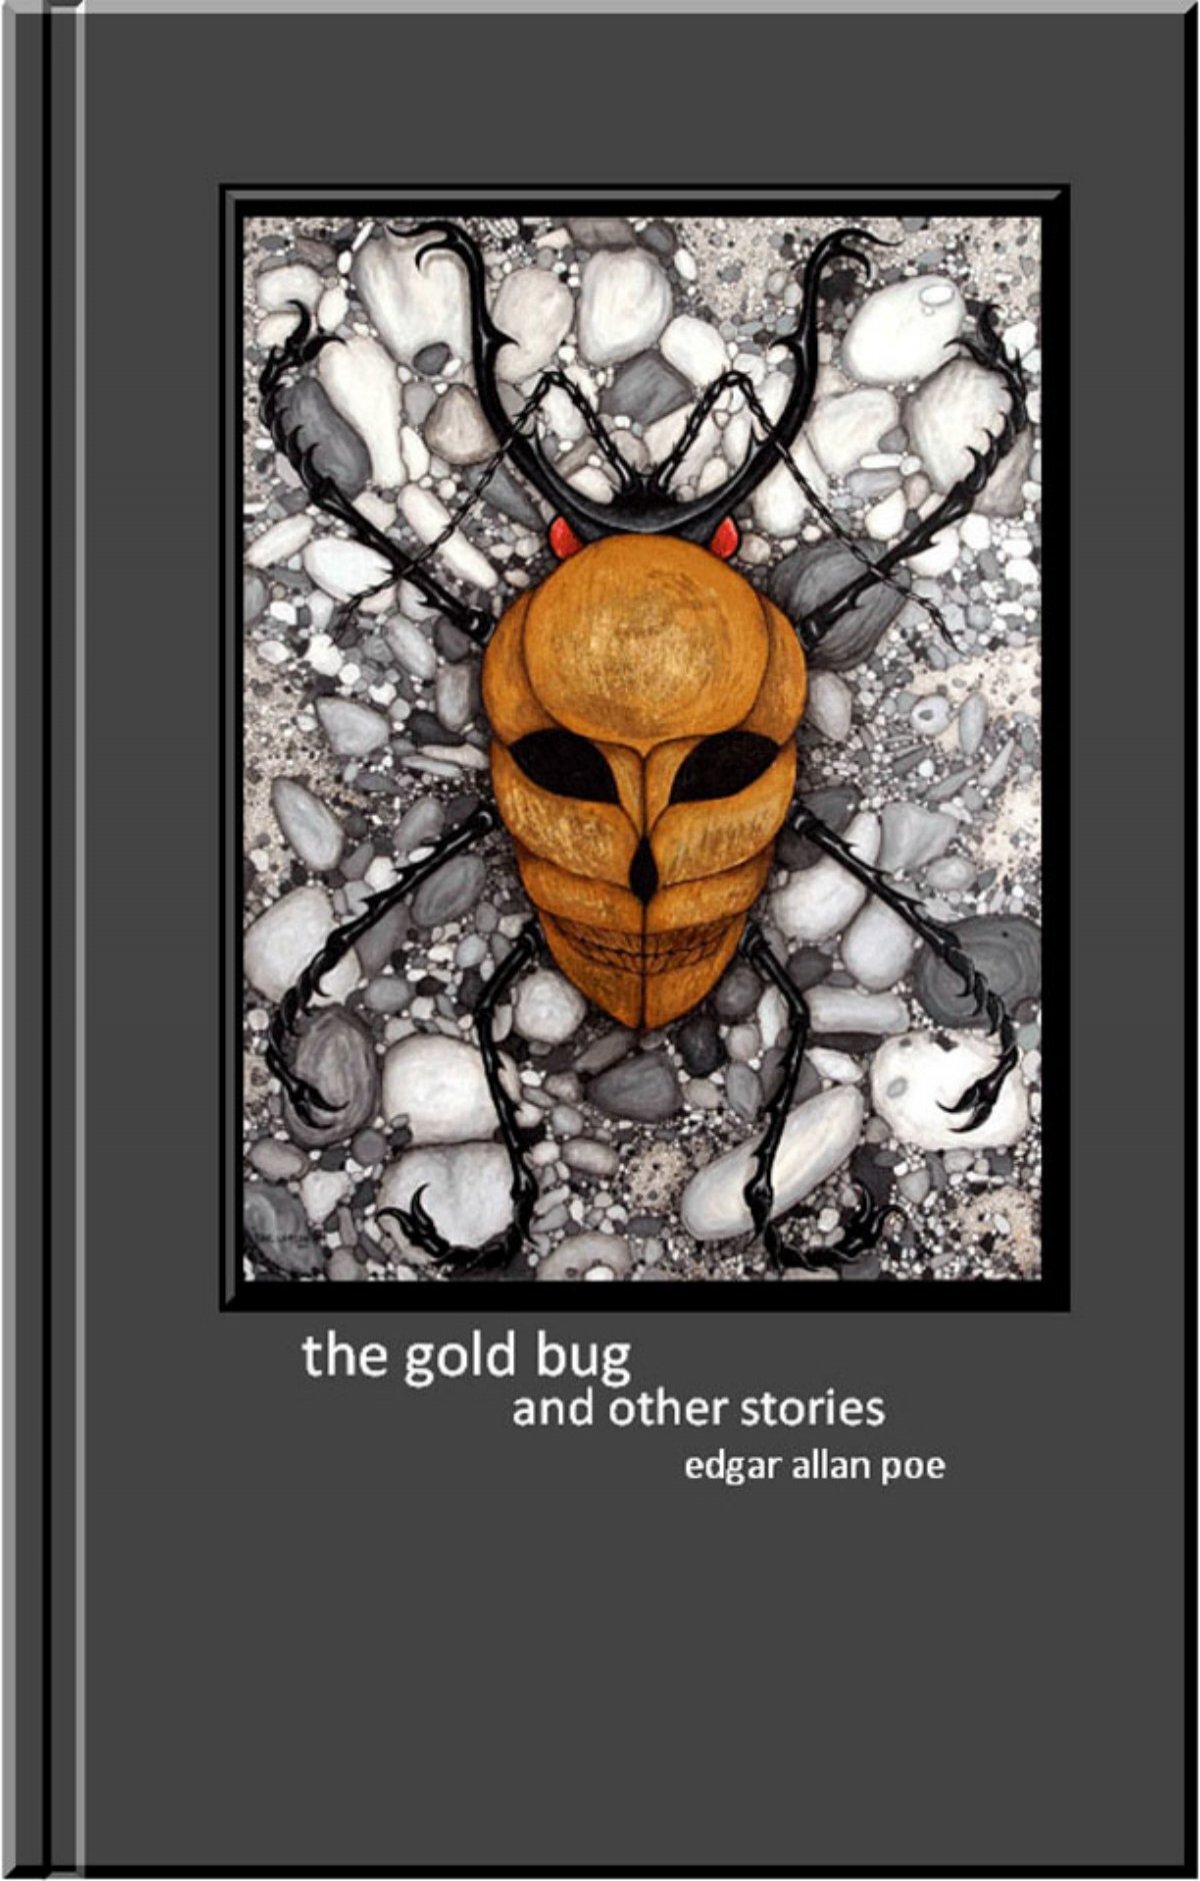 The Gold Bug and other stories - Sunny Hills High School